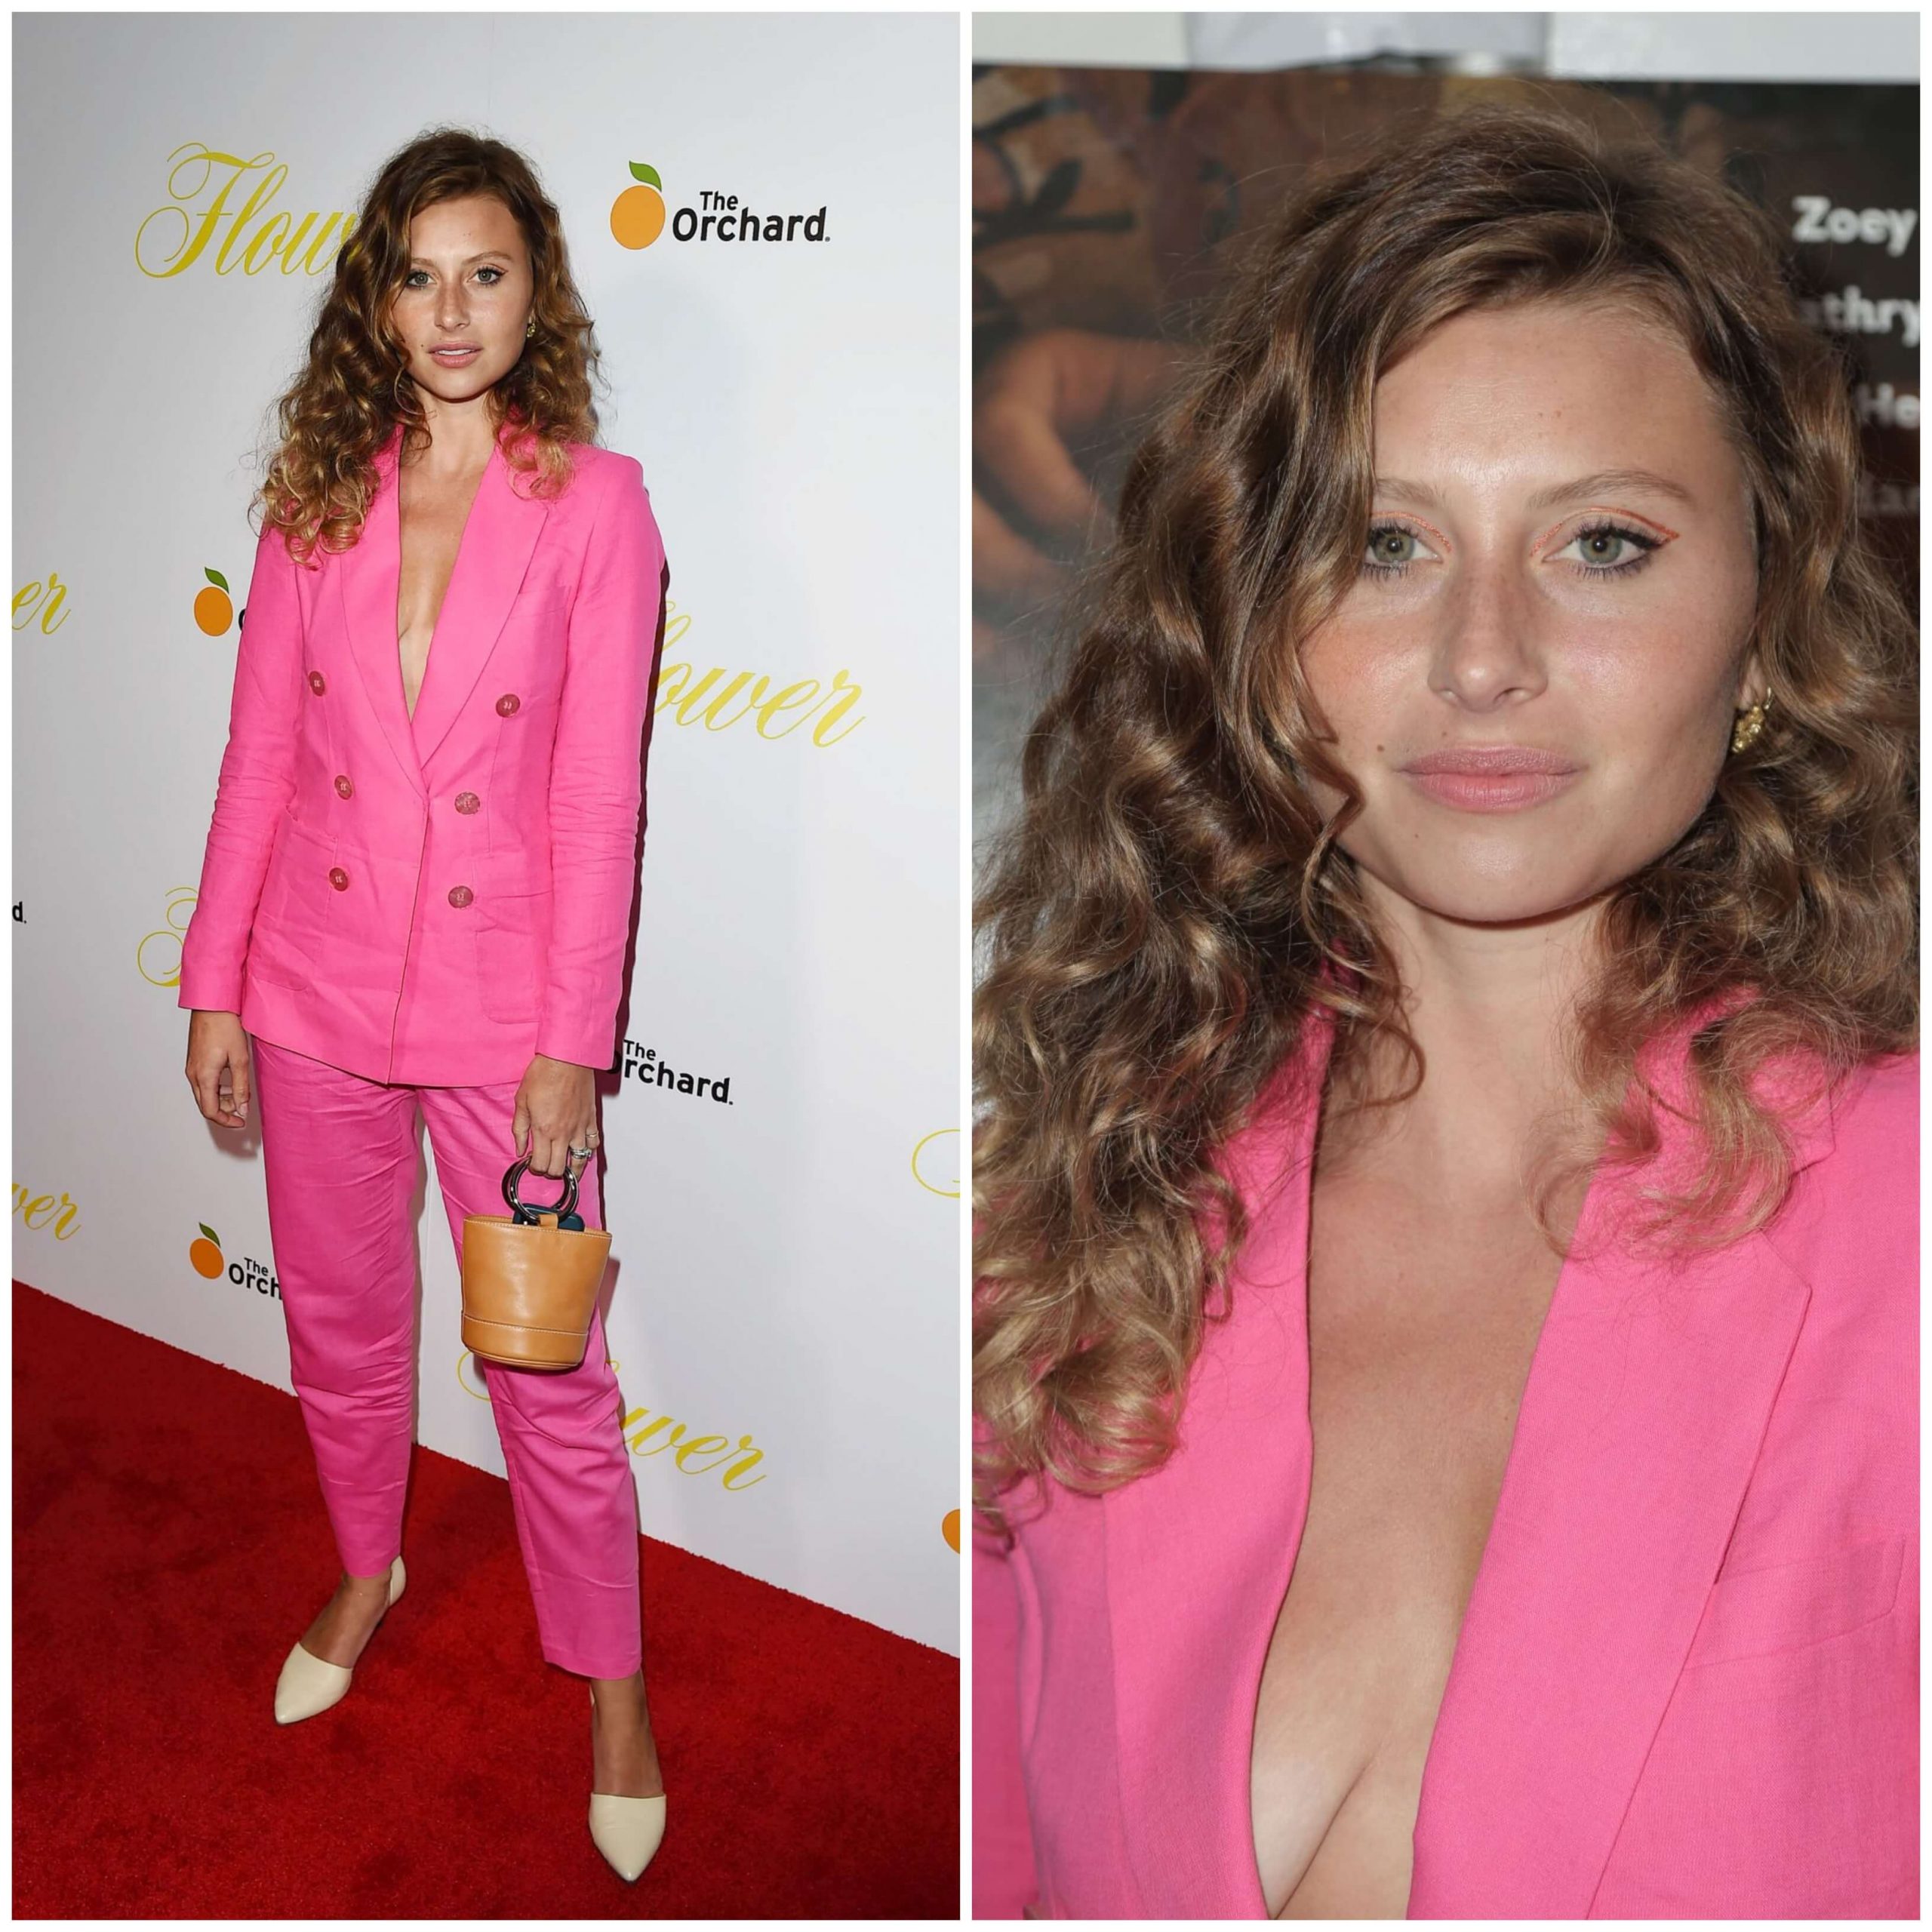 Alyson Aly Michalka - Bold In Pink Blazer & Pants Outfits With Brown Clutch